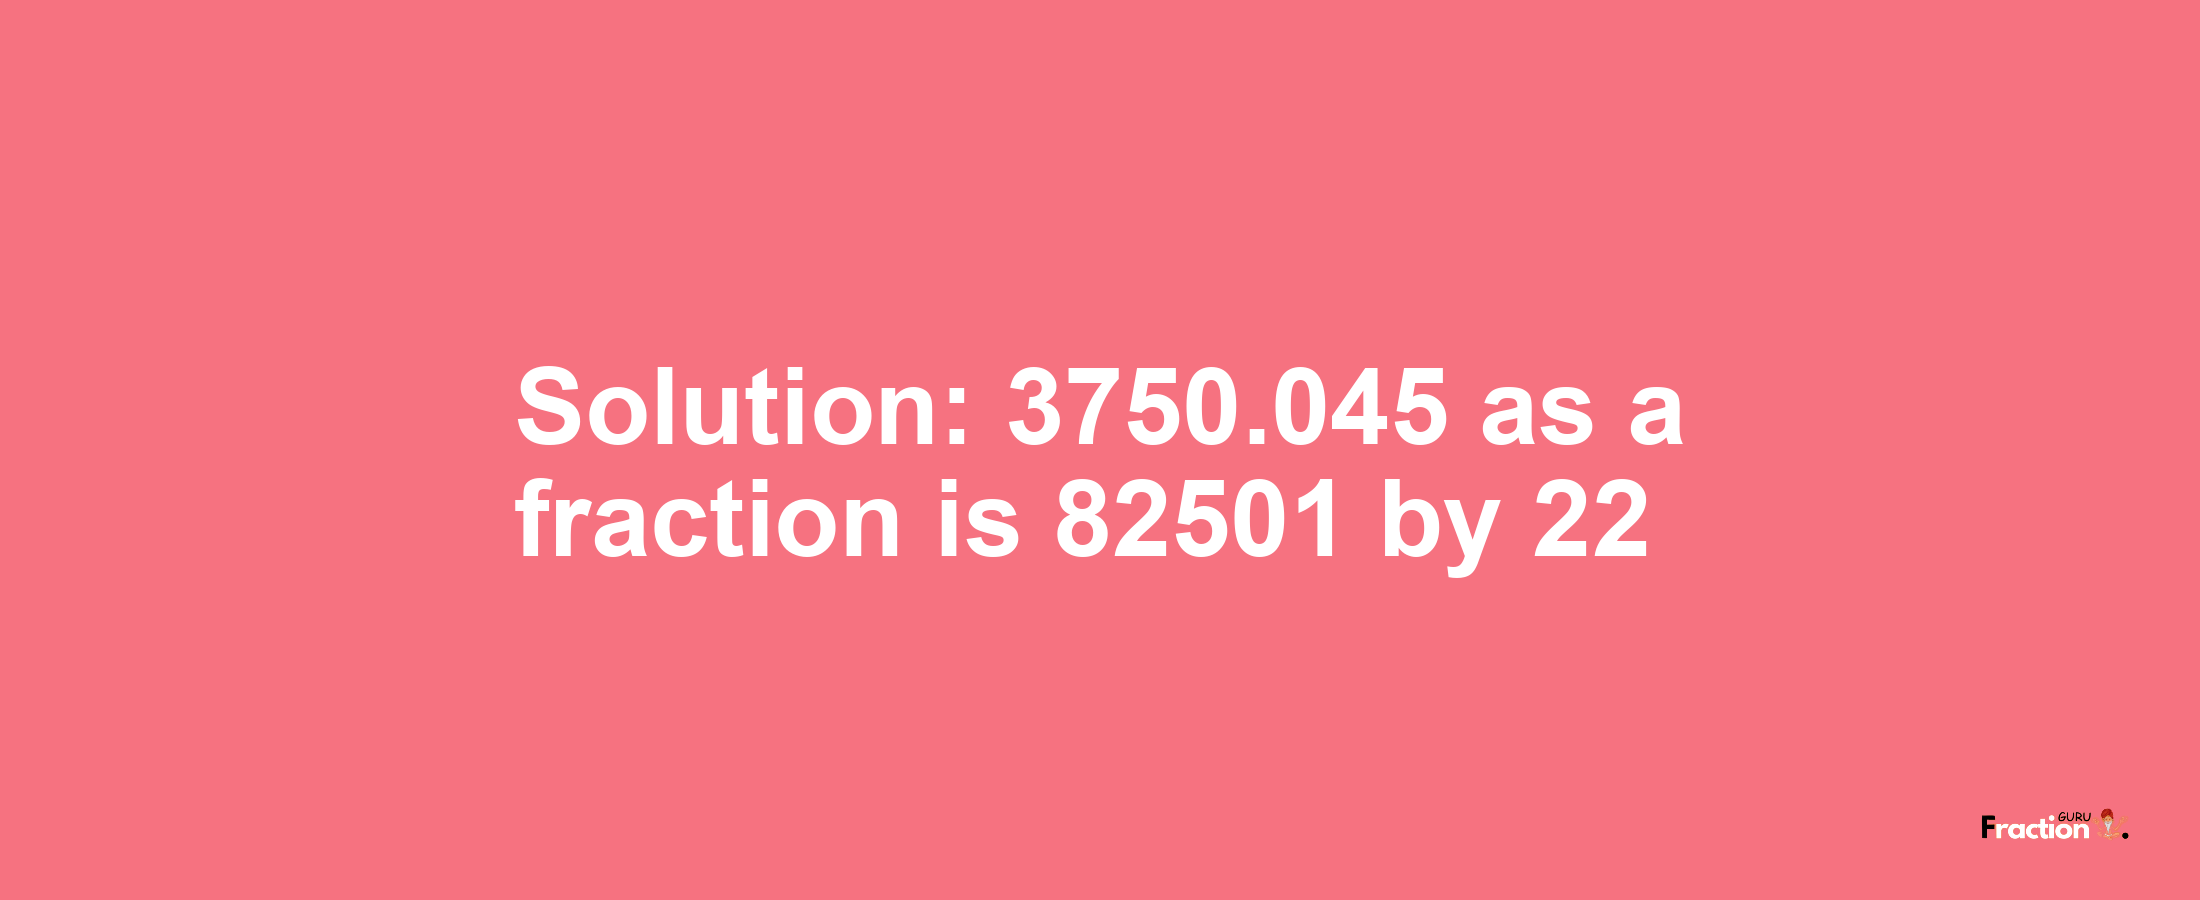 Solution:3750.045 as a fraction is 82501/22